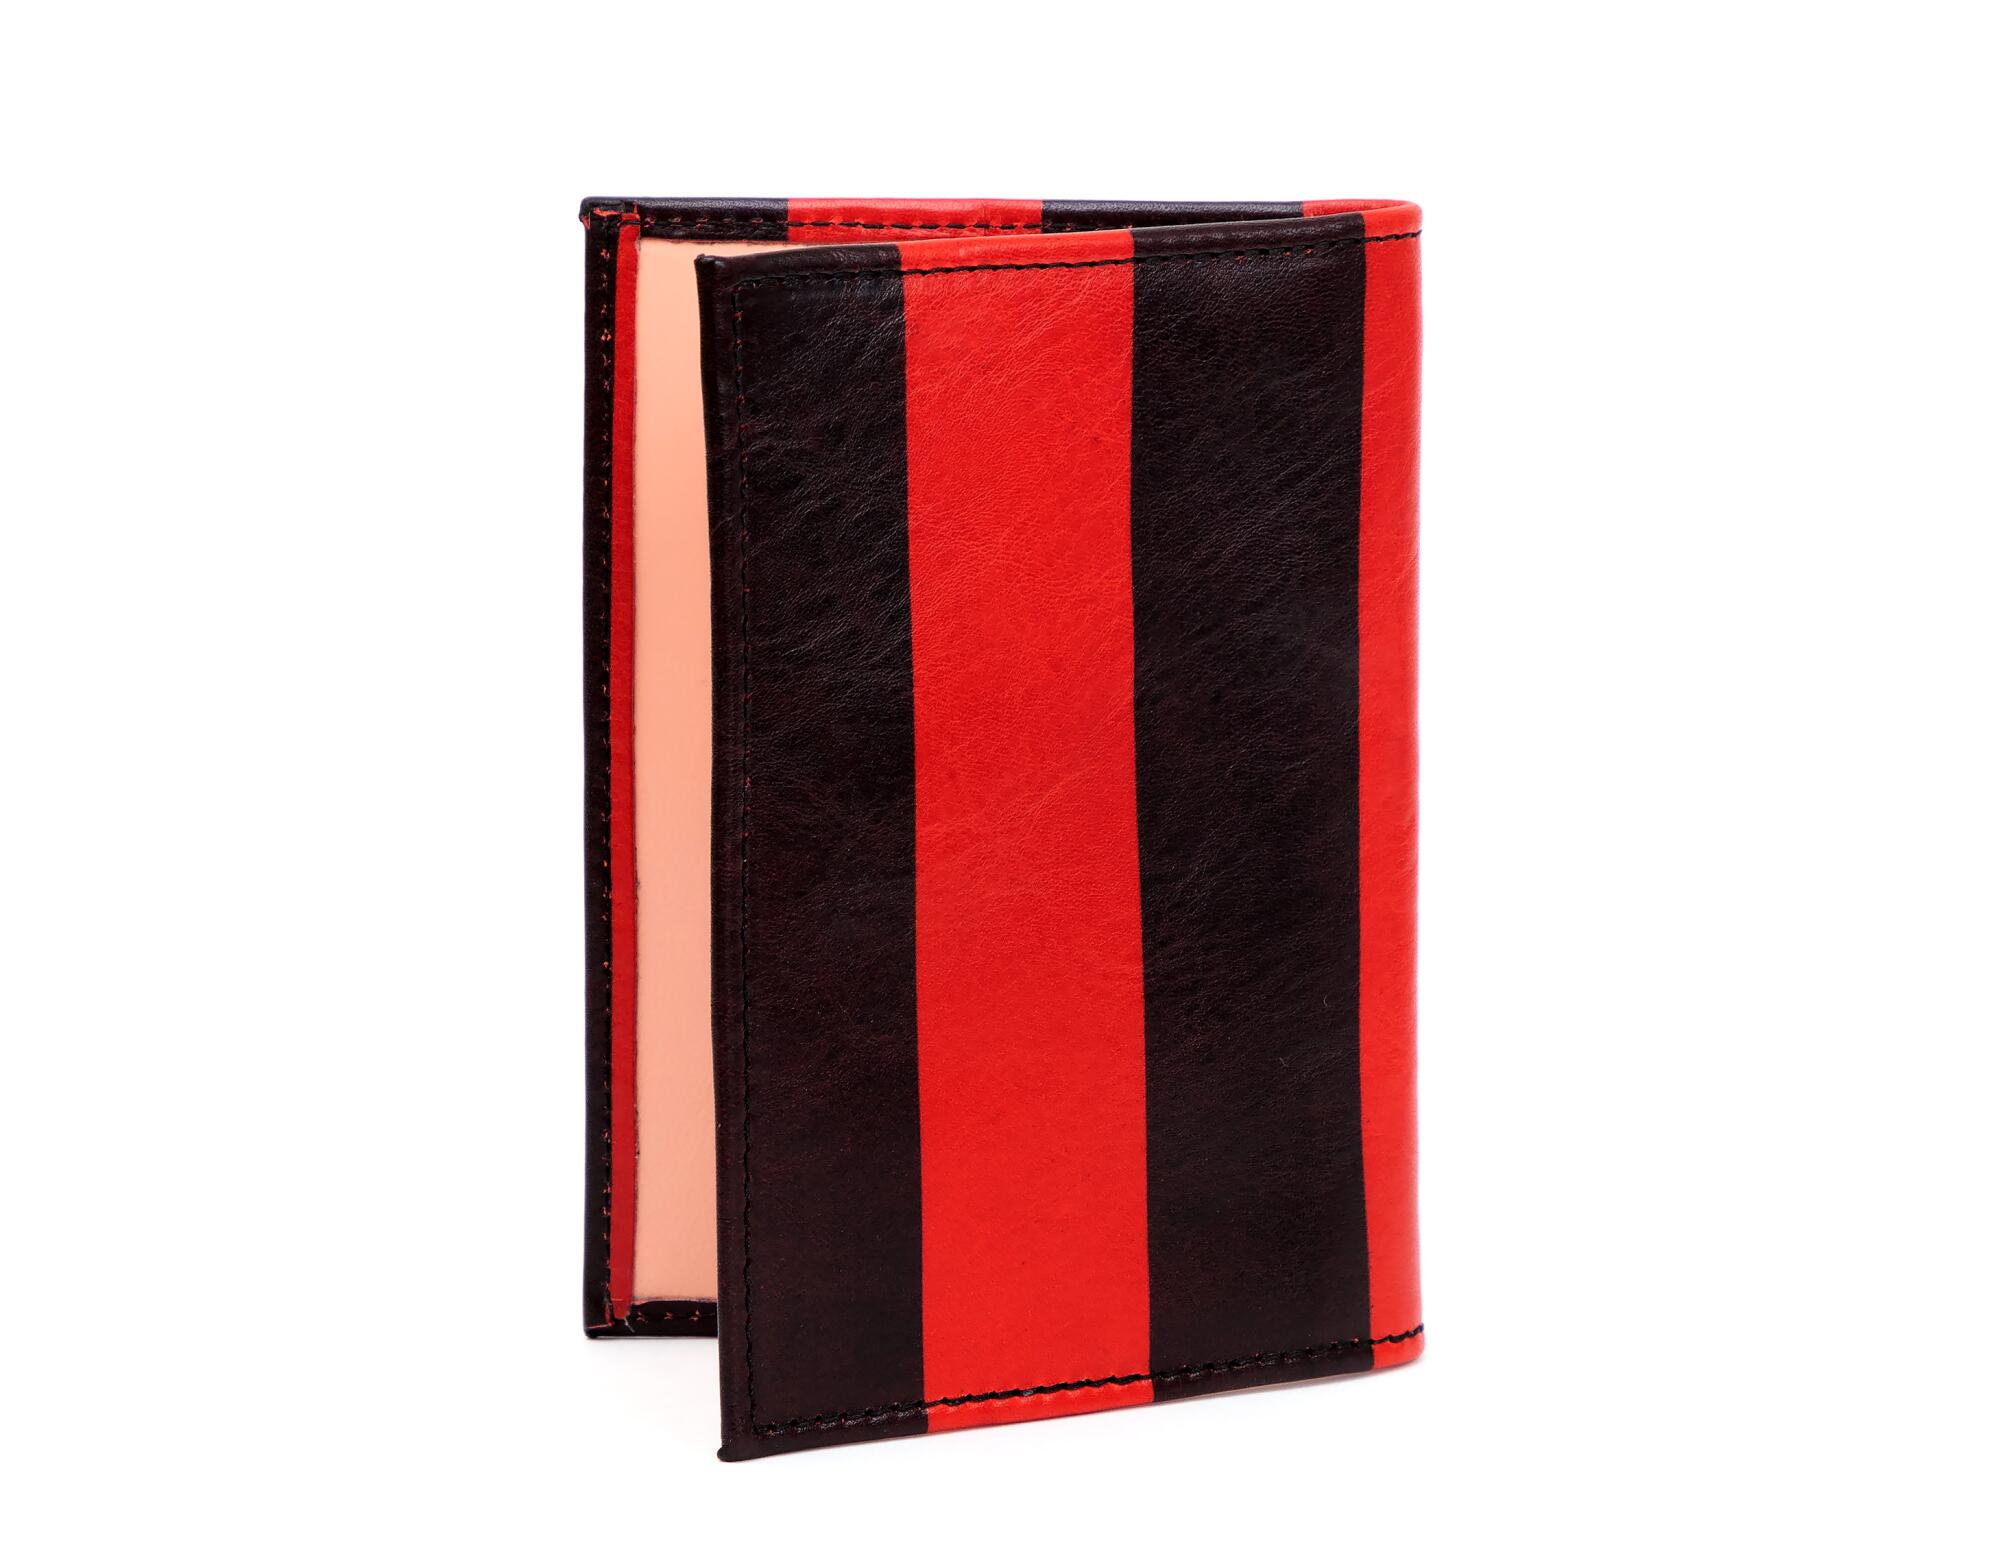 A red-and-black-striped passport case.